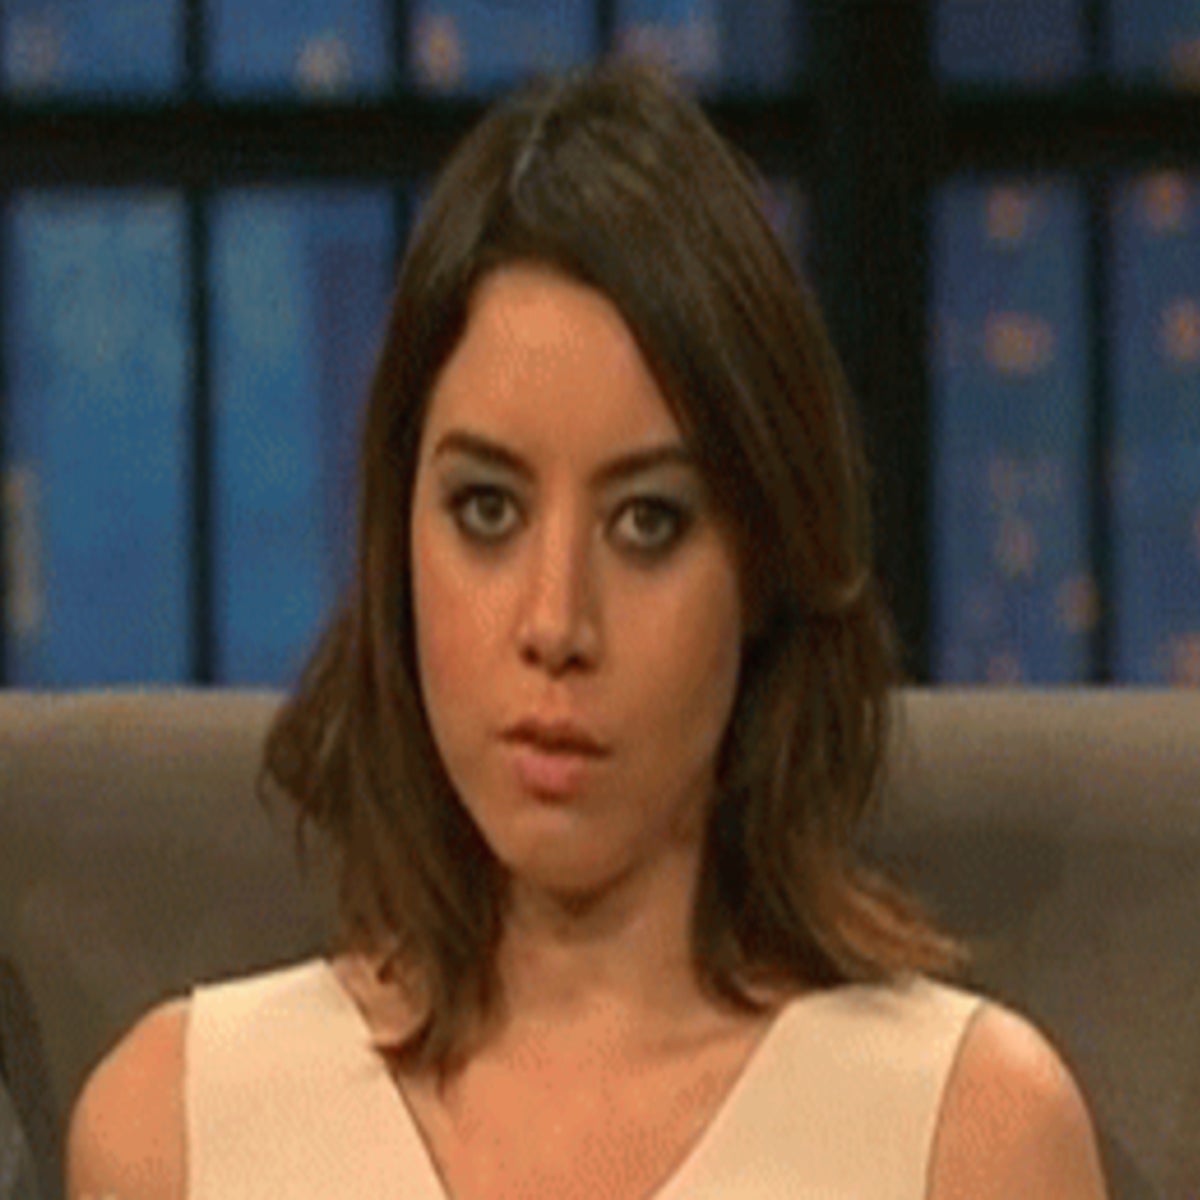 Aubrey Plaza had a brutal response to Jared Leto's Met Gala cat outfit